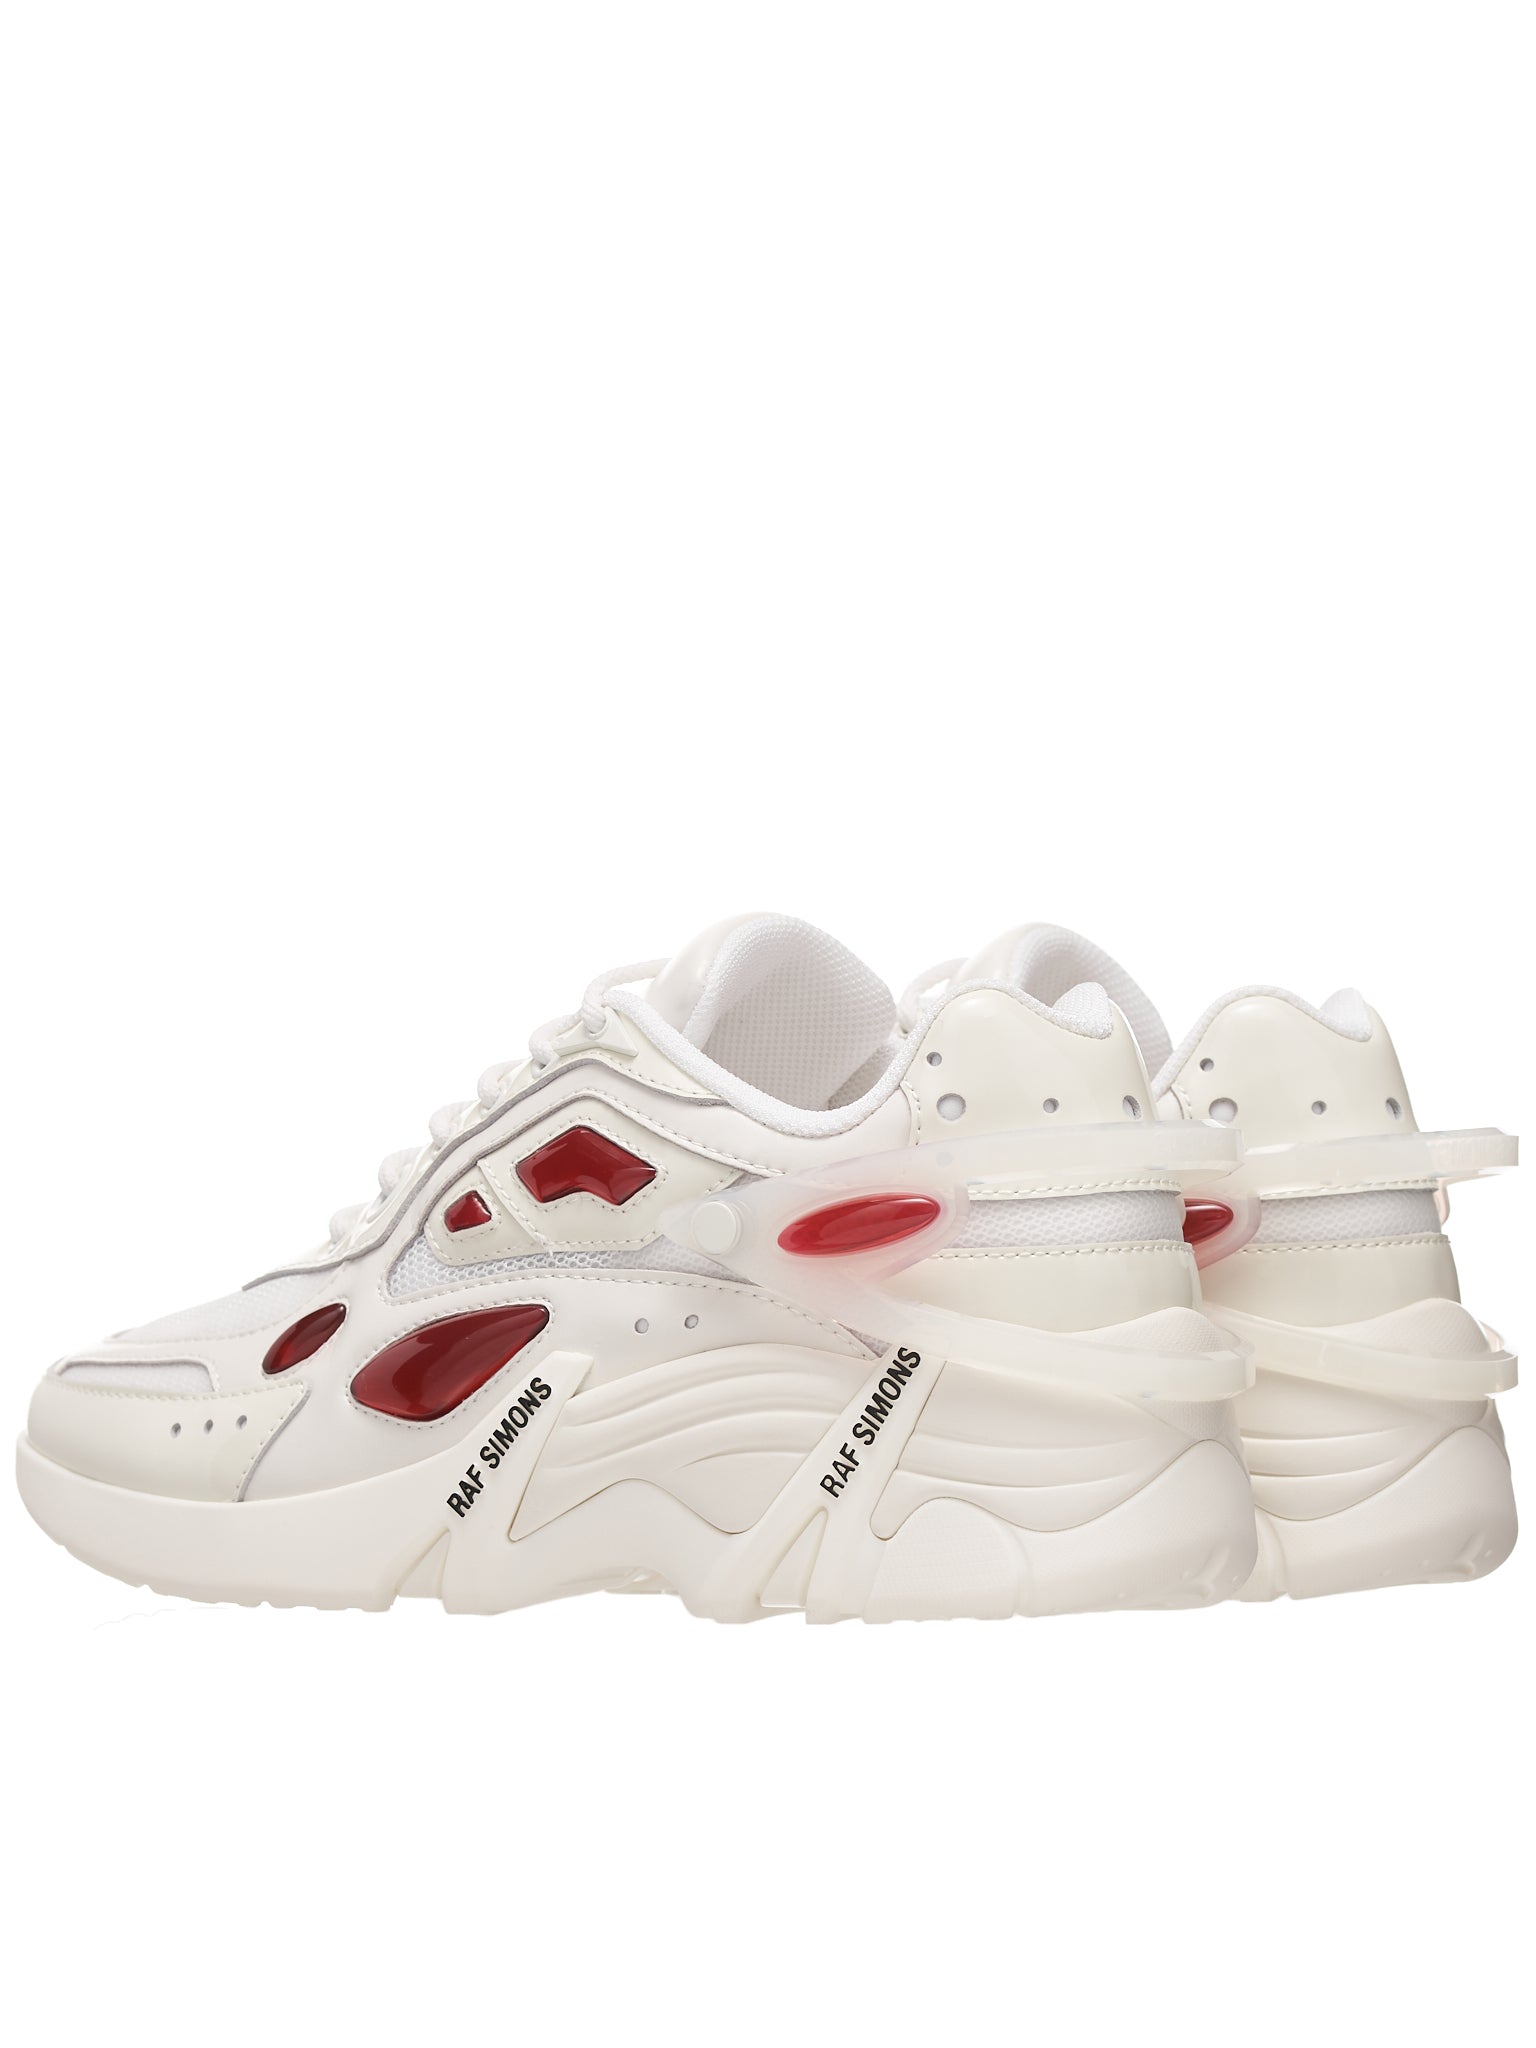 Cyclon-21 Sneakers (CYLON-21-OFF-WHITE-RED)